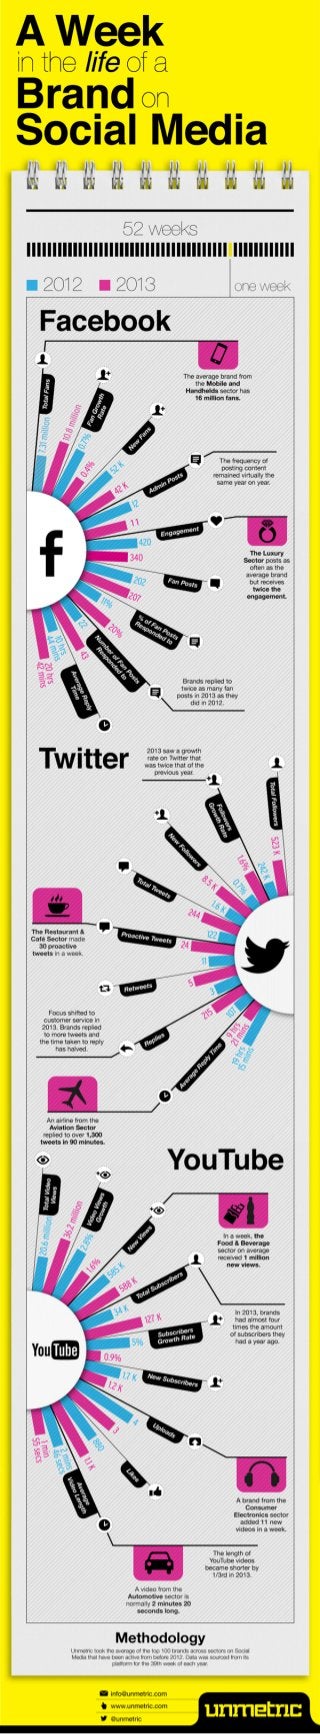 A Week in the life of a Brand on Social Media [INFOGRAPHIC]